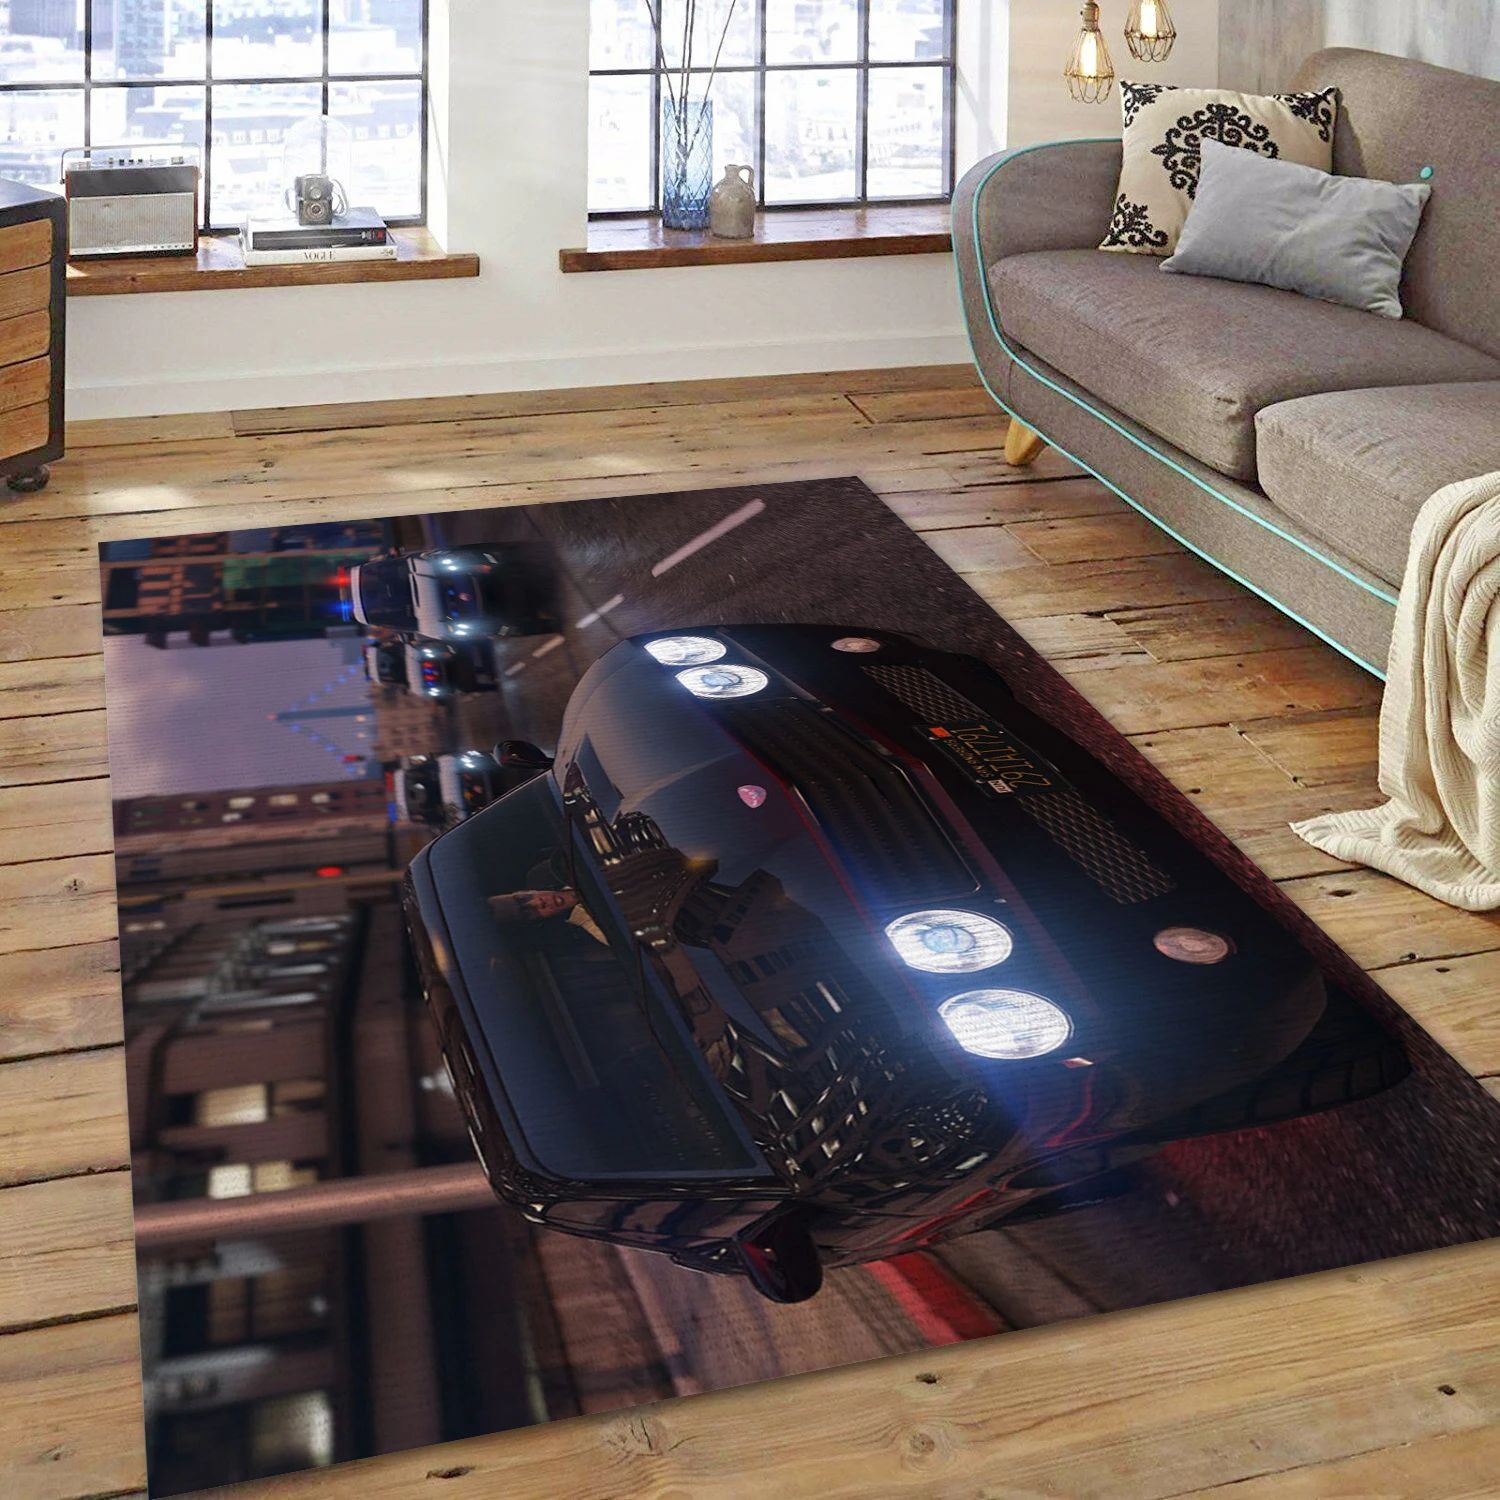 Grand Theft Auto V Gaming Area Rug, Living Room Rug - Home Decor Floor Decor - Indoor Outdoor Rugs